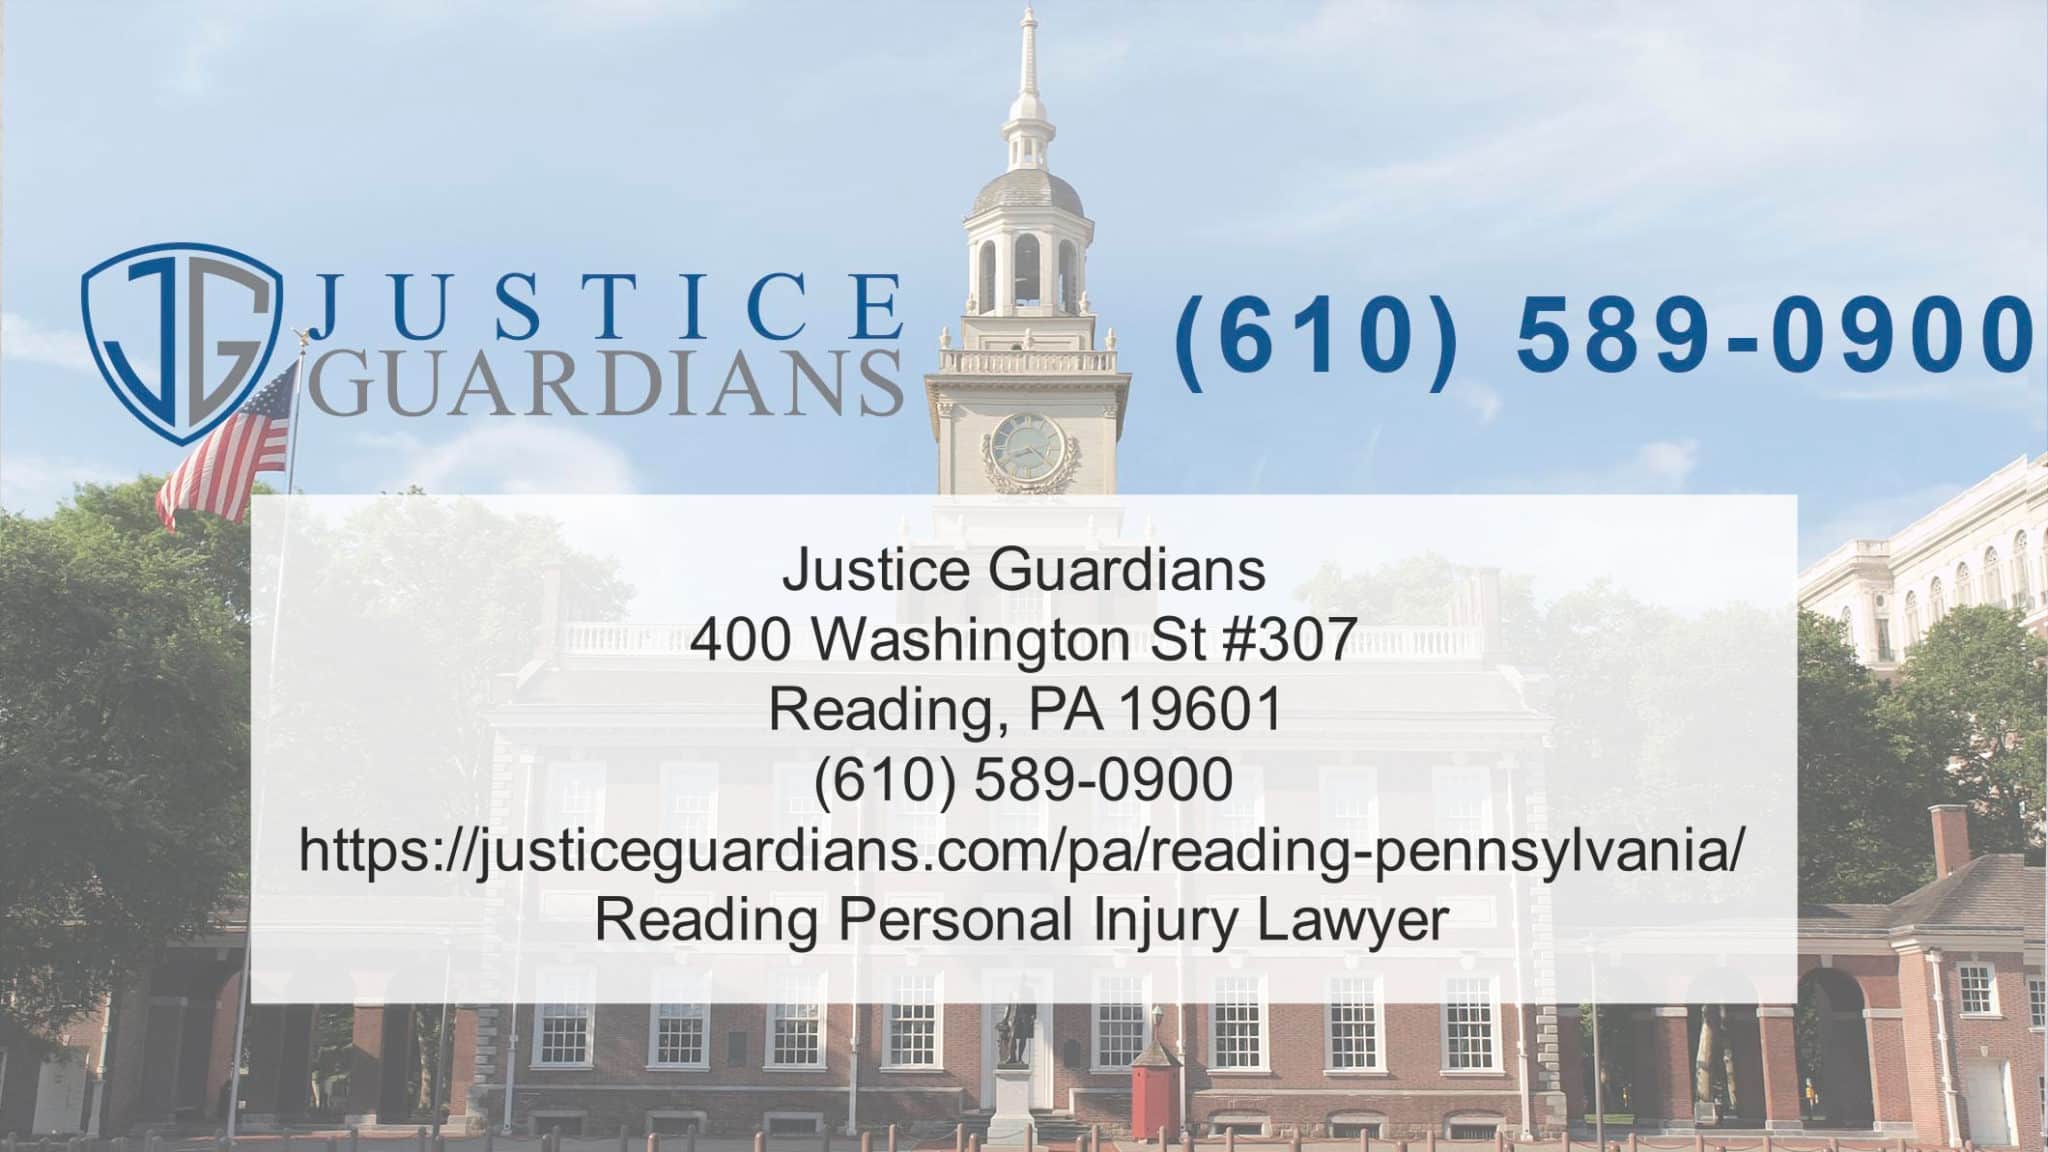 Back Injury Workers Compensation Attorneys In Reading, PA Help Victims Recover